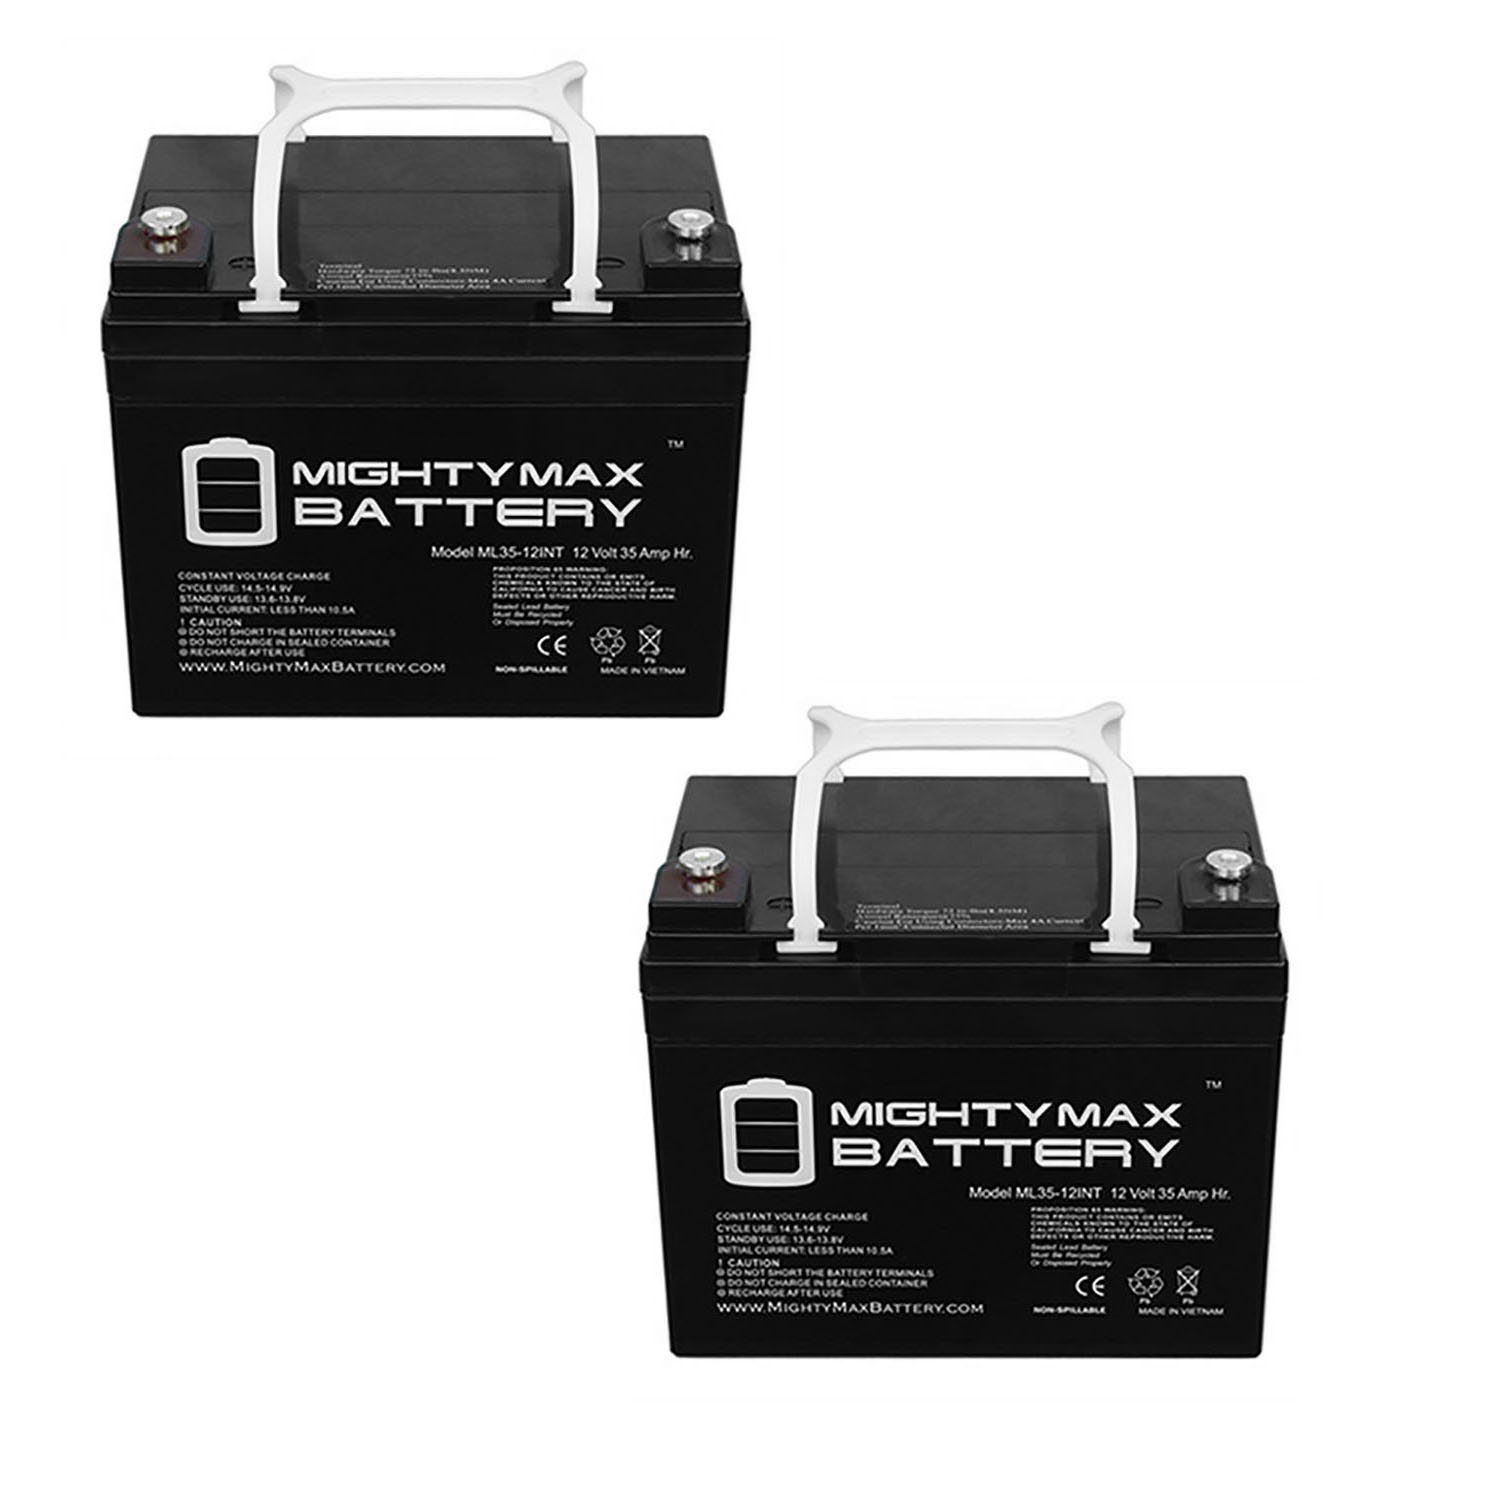 12V 35AH INT Replacement Battery for Ihc Cub Garden 182 - 2 Pack